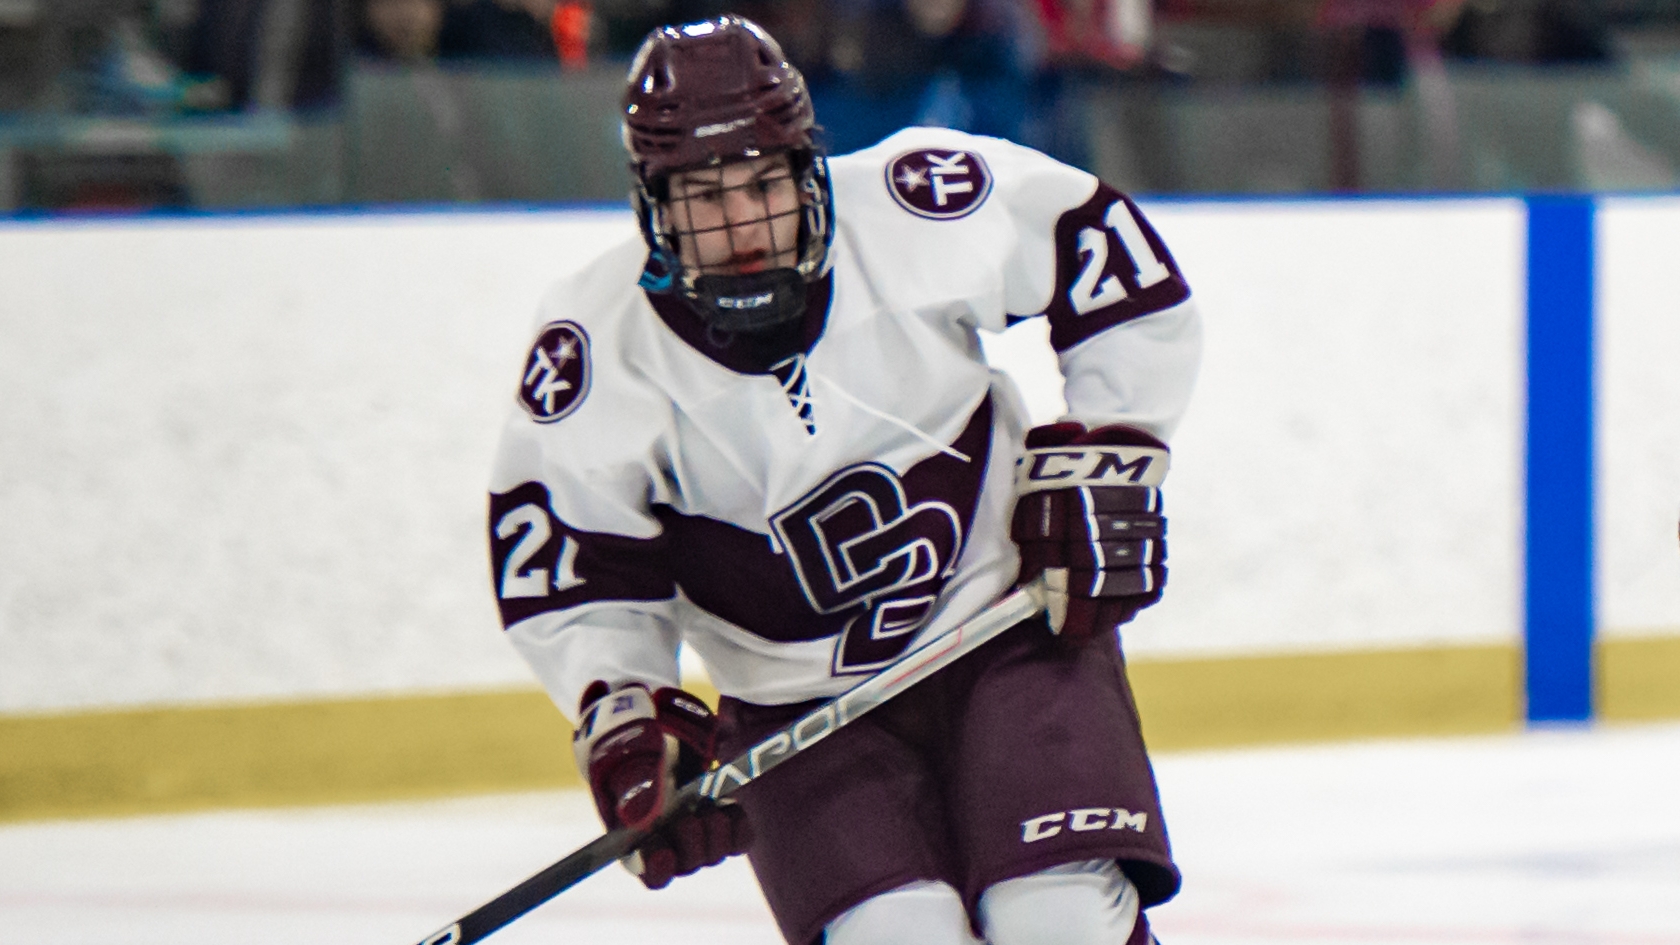 Academy vs. prep school: A faceoff for the top hockey talent - New